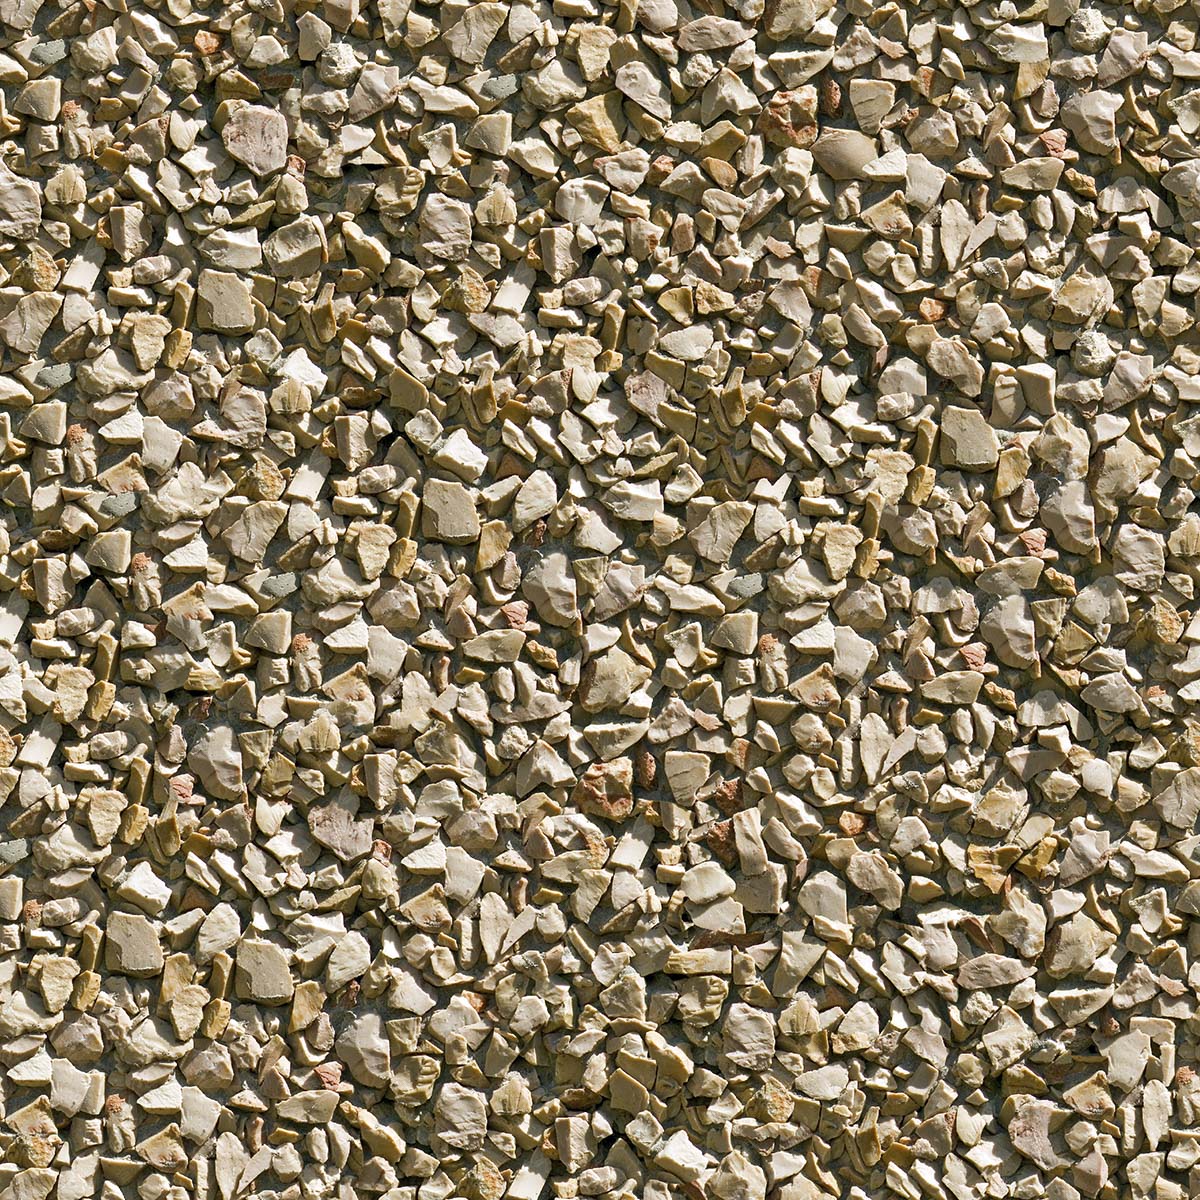 A close up of a pile of small rocks